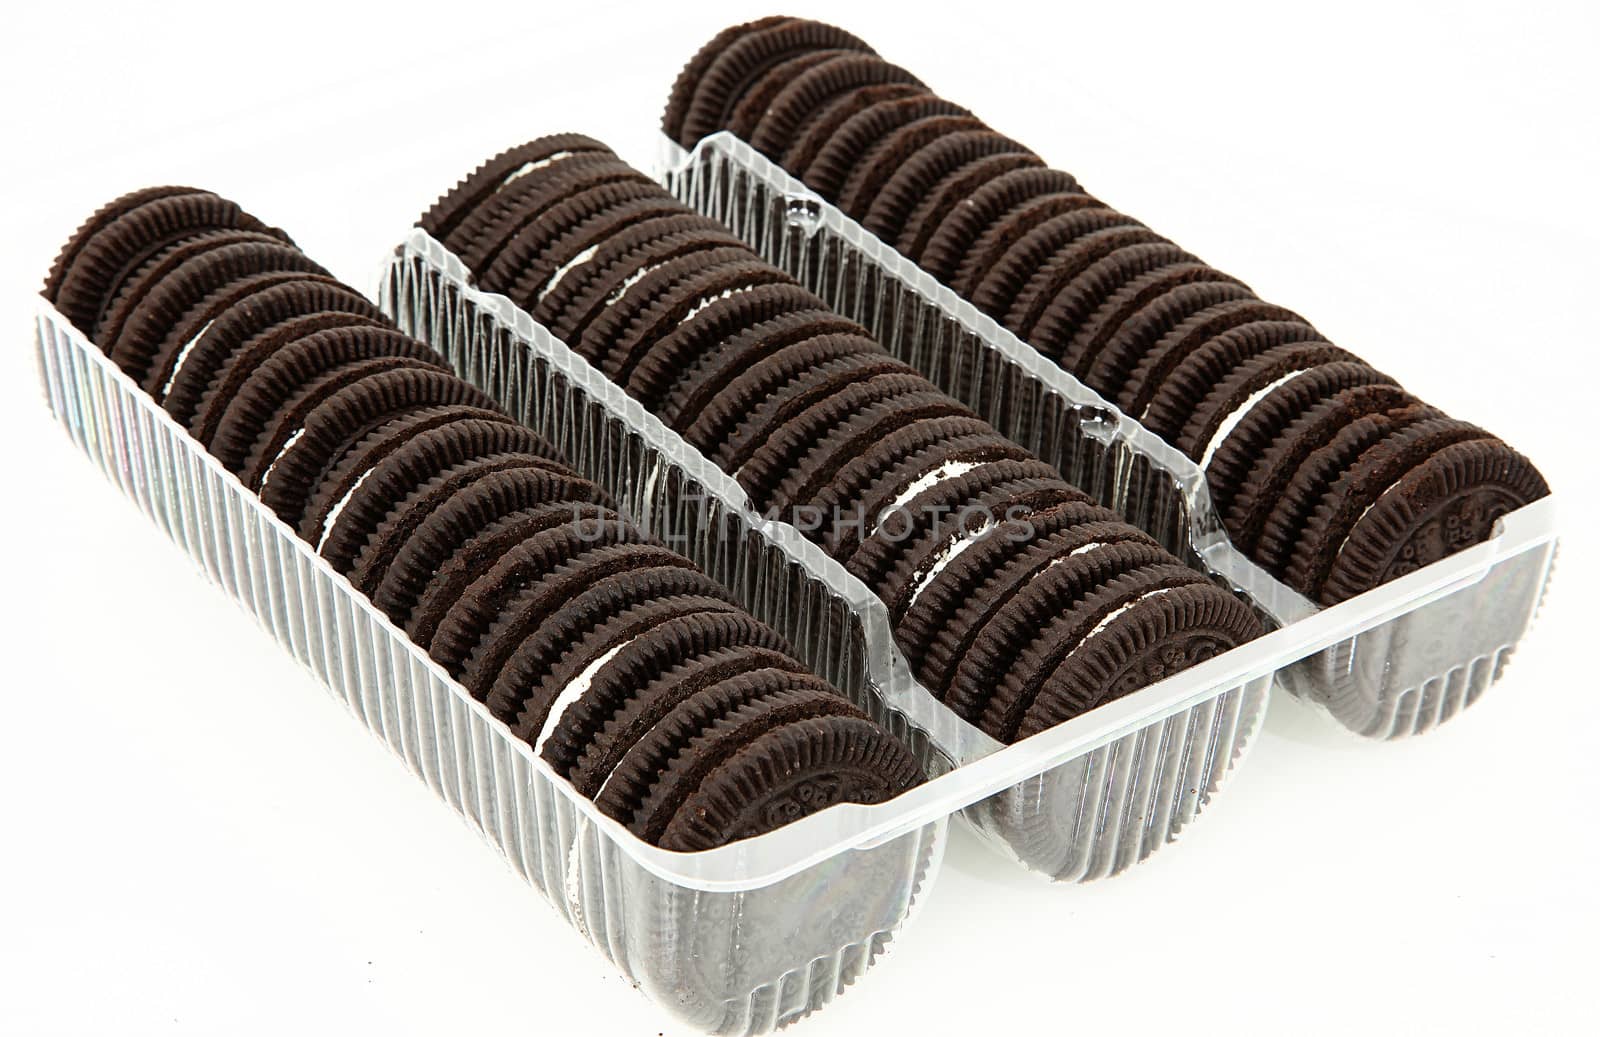 Package of Chocolate Cookies with Cream Filling by duplass